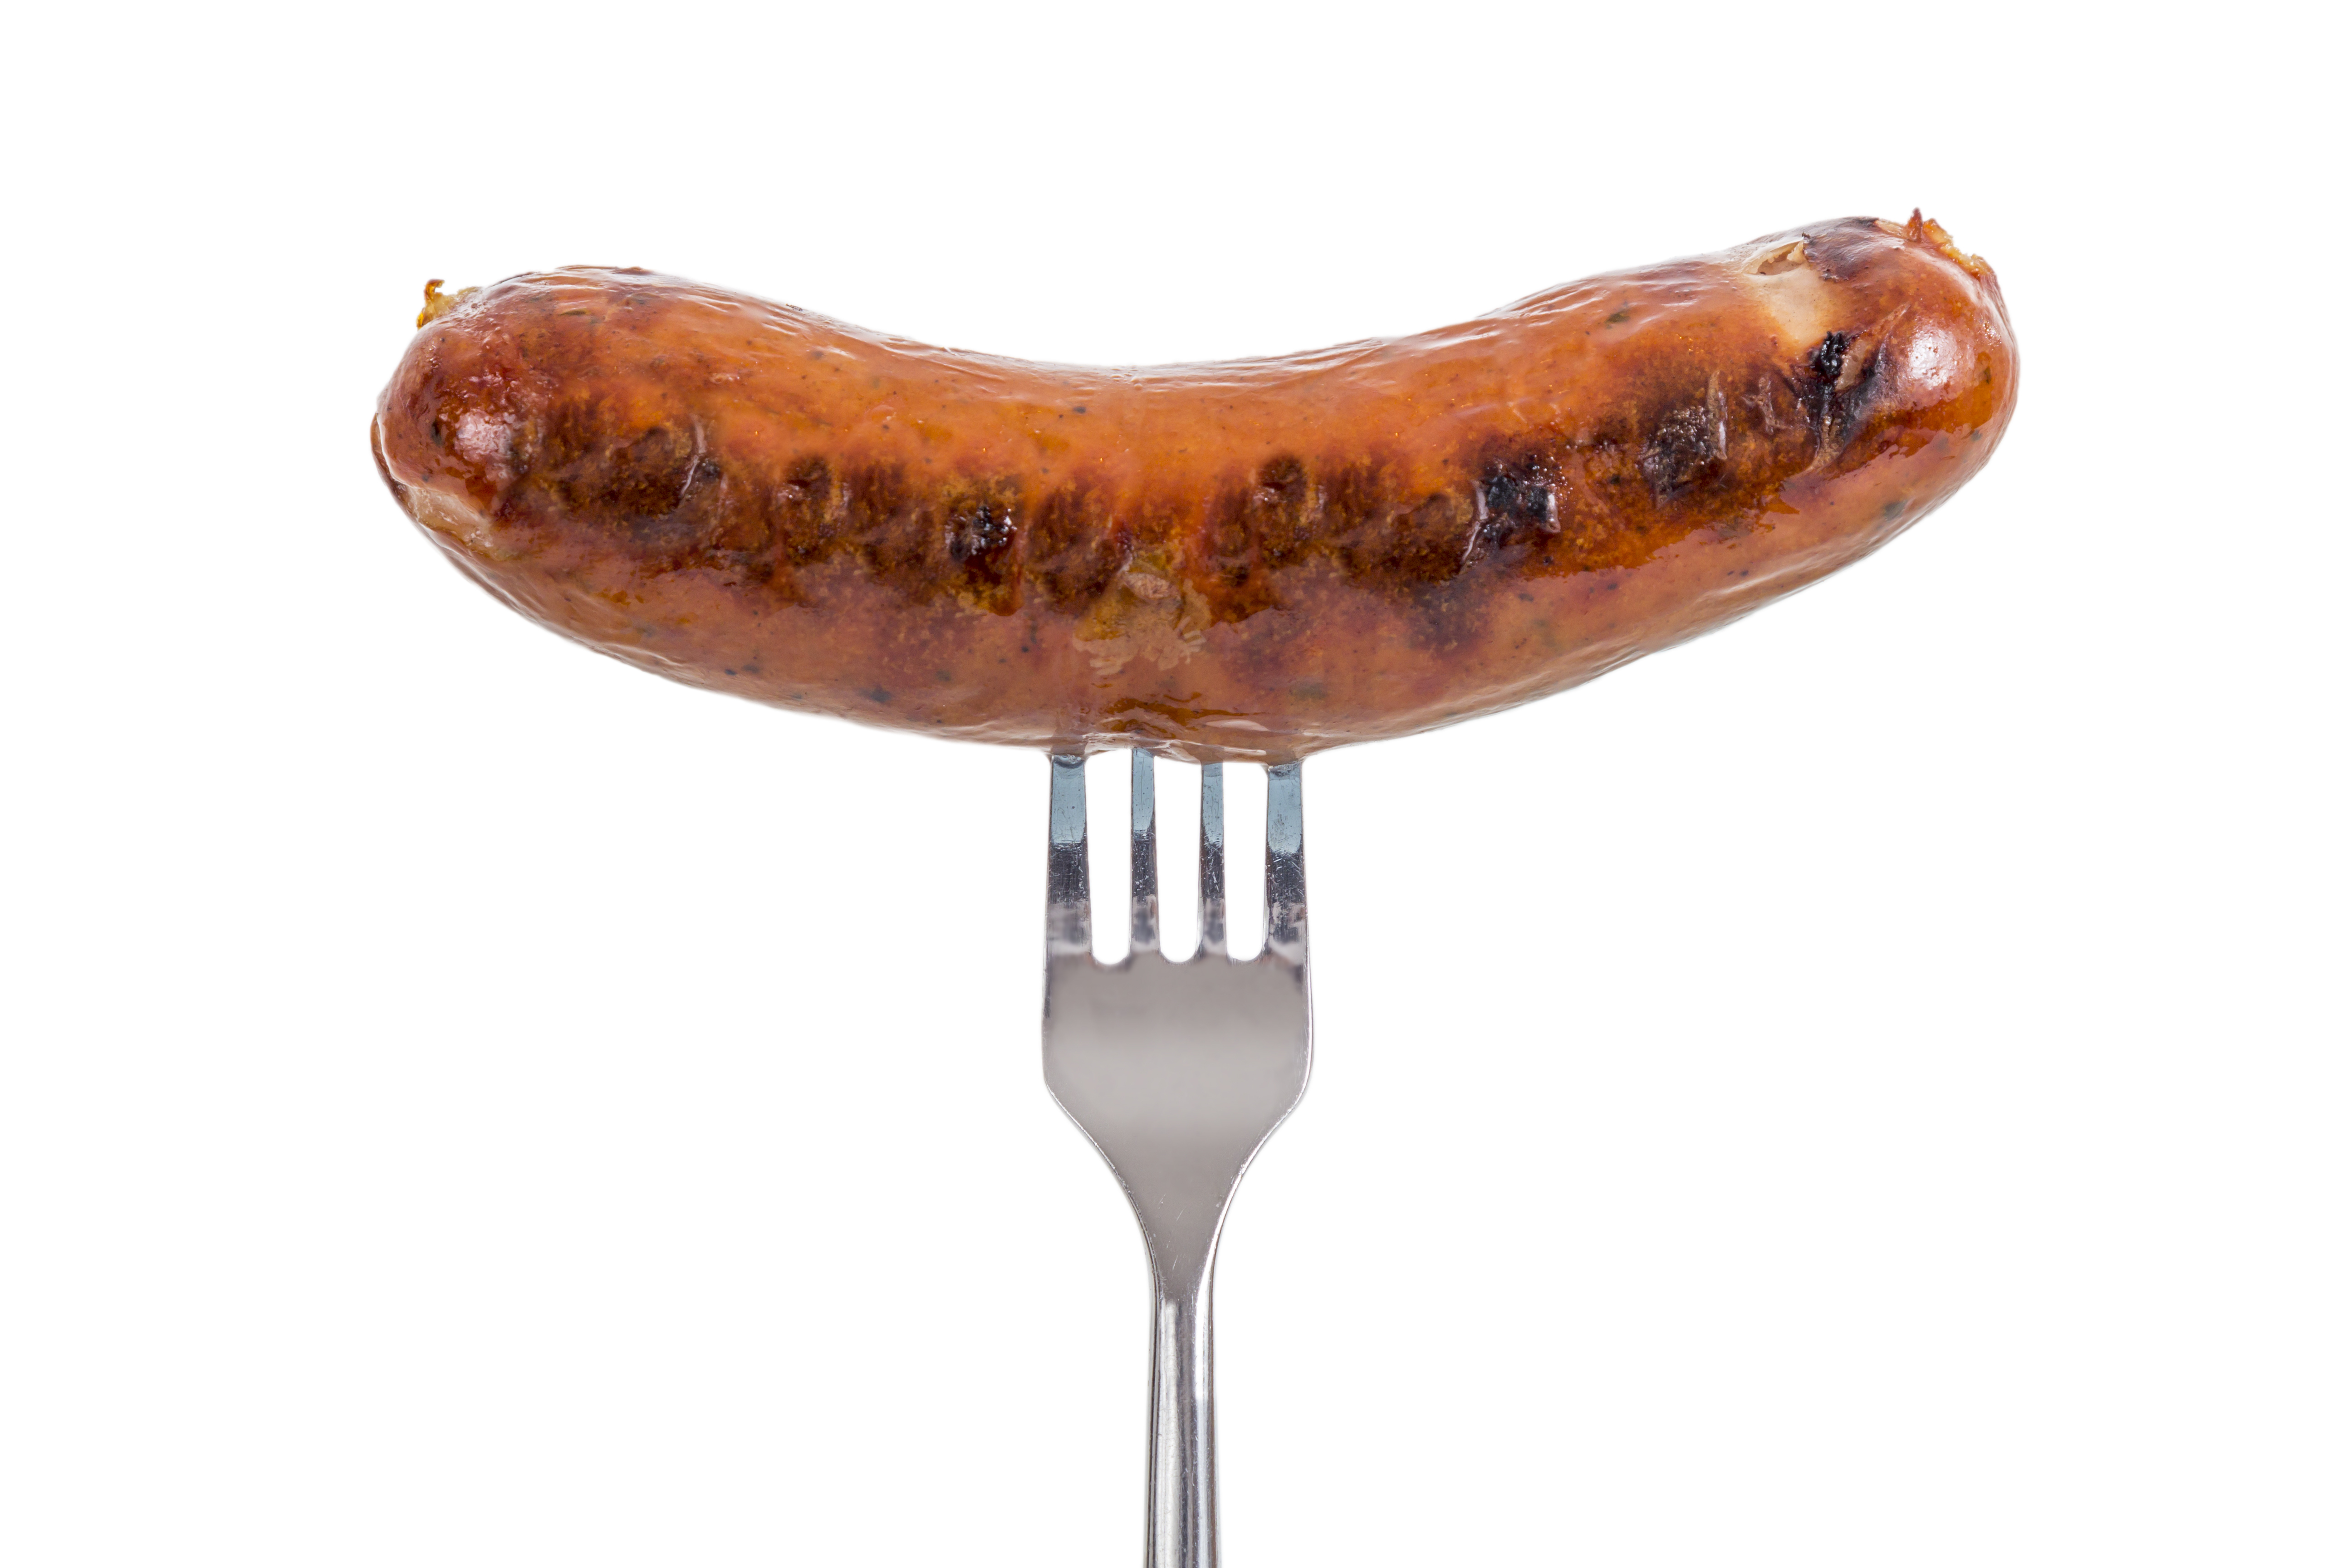 A sausage on a fork | Source: Shutterstock